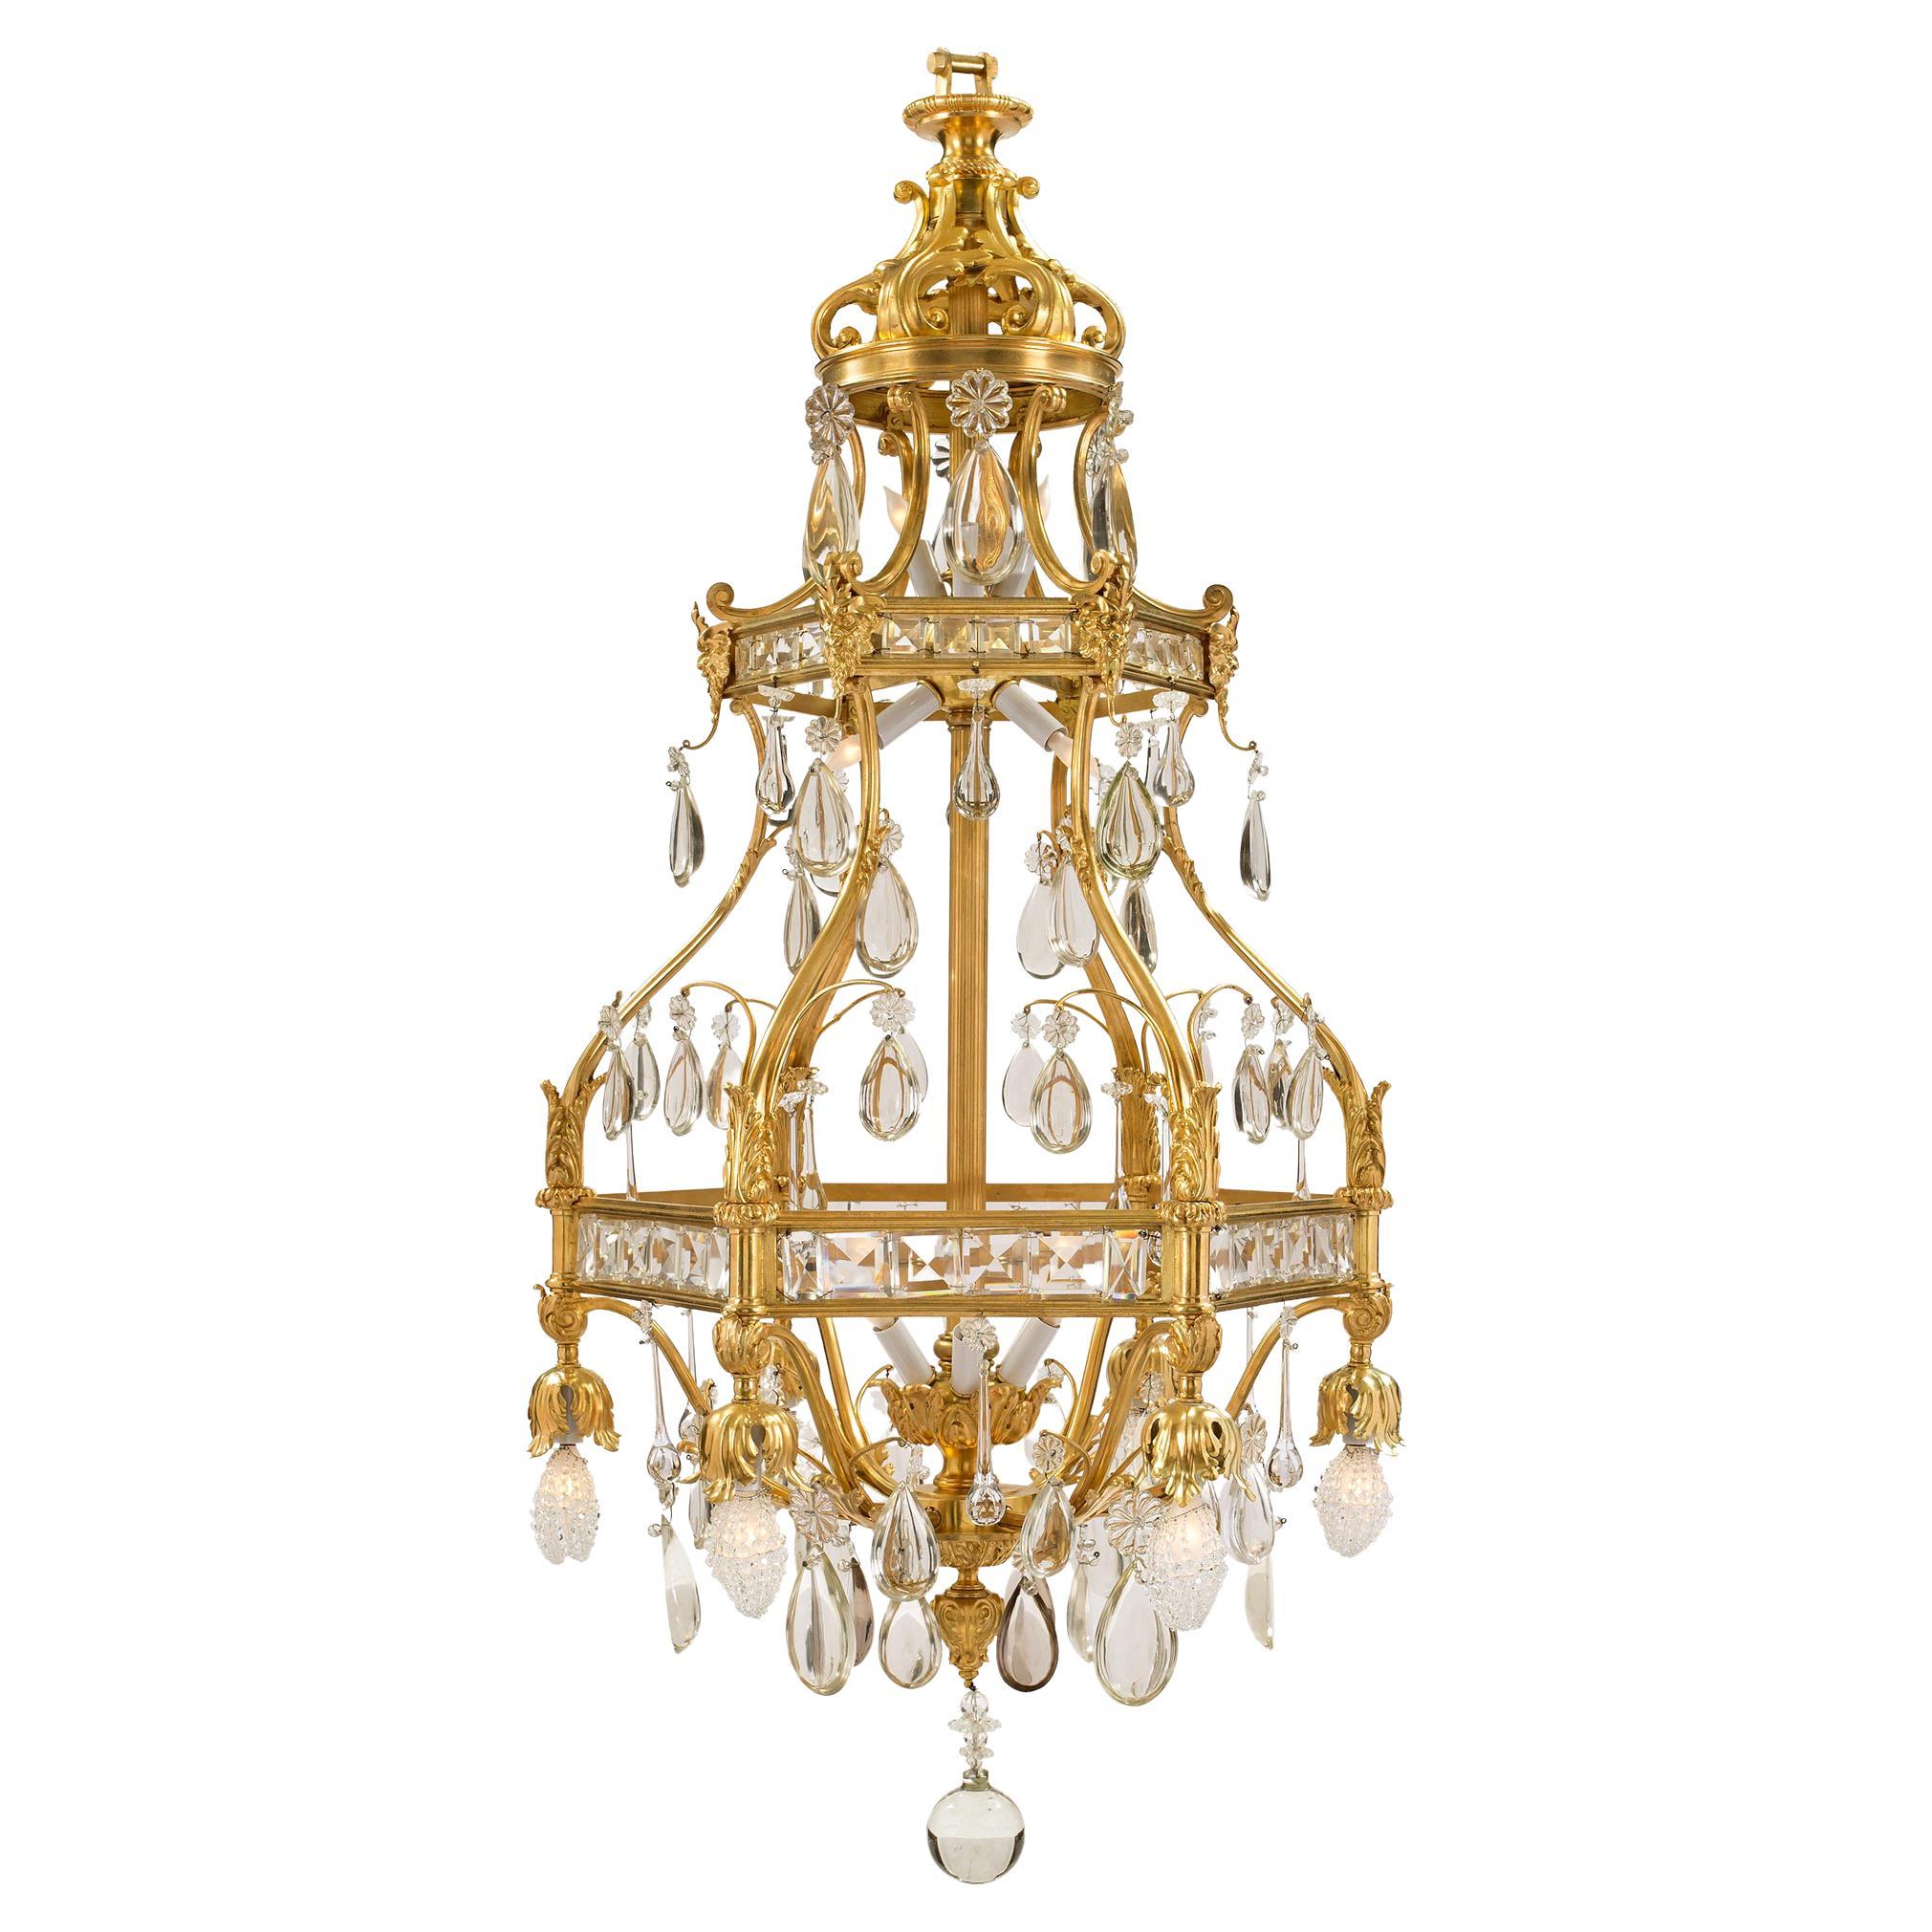 French 19th Century Louis XV Style Ormolu and Baccarat Crystal Chandelier For Sale